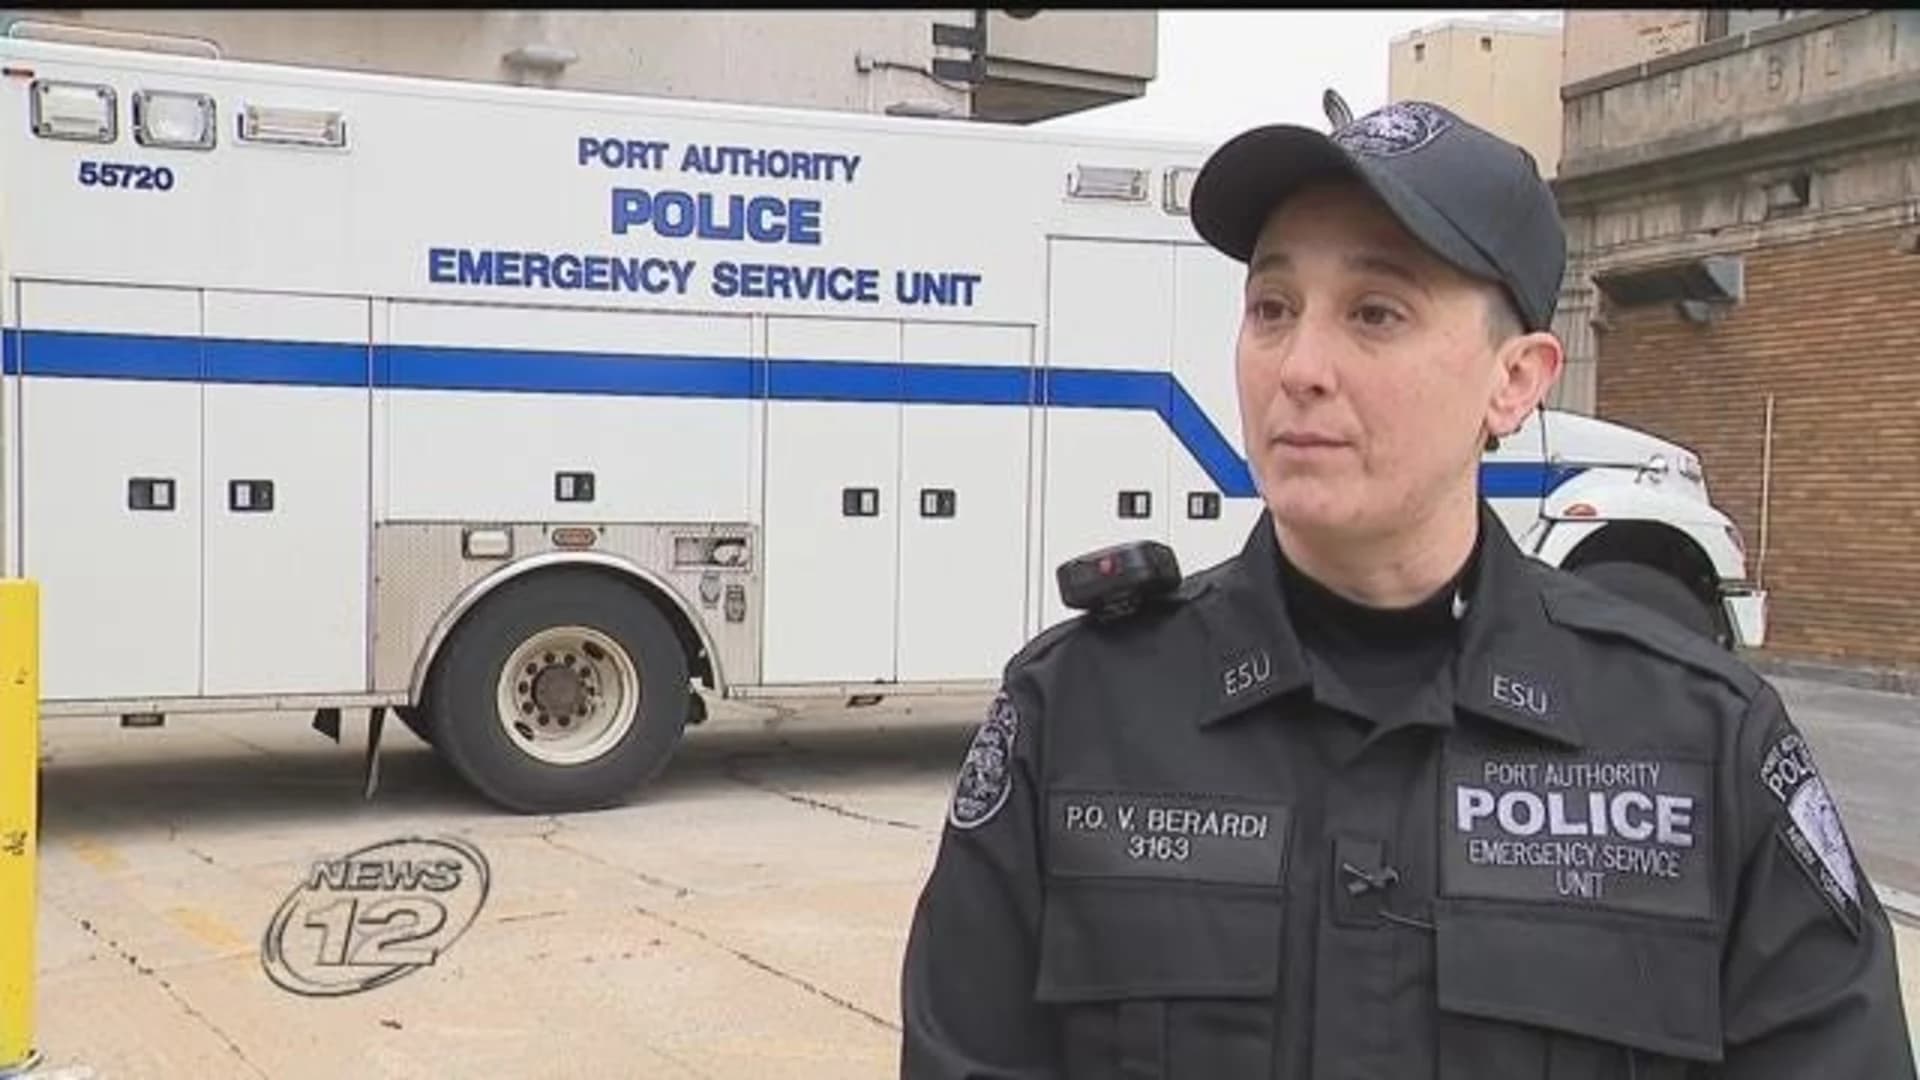 Port Authority officer becomes only woman on emergency services team